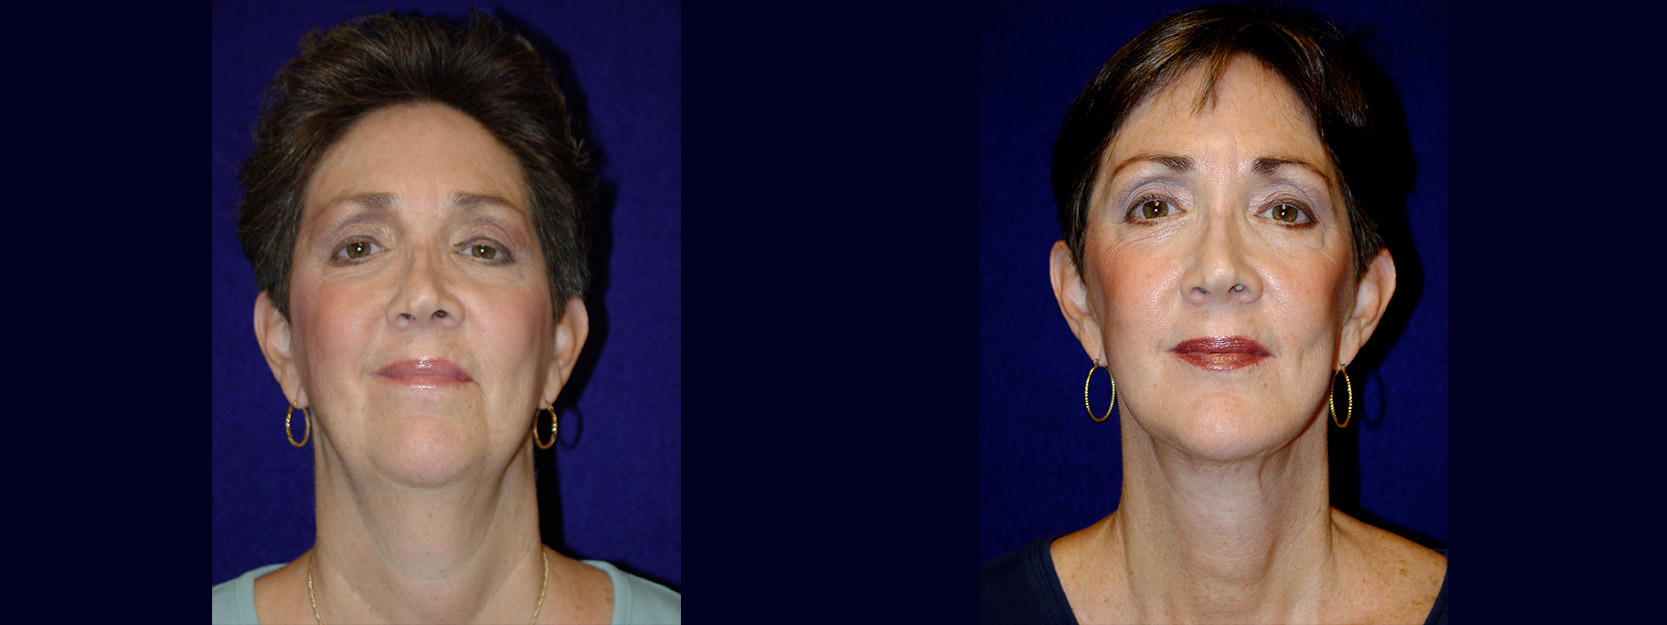 Frontal View - Facelift & Chin Implant